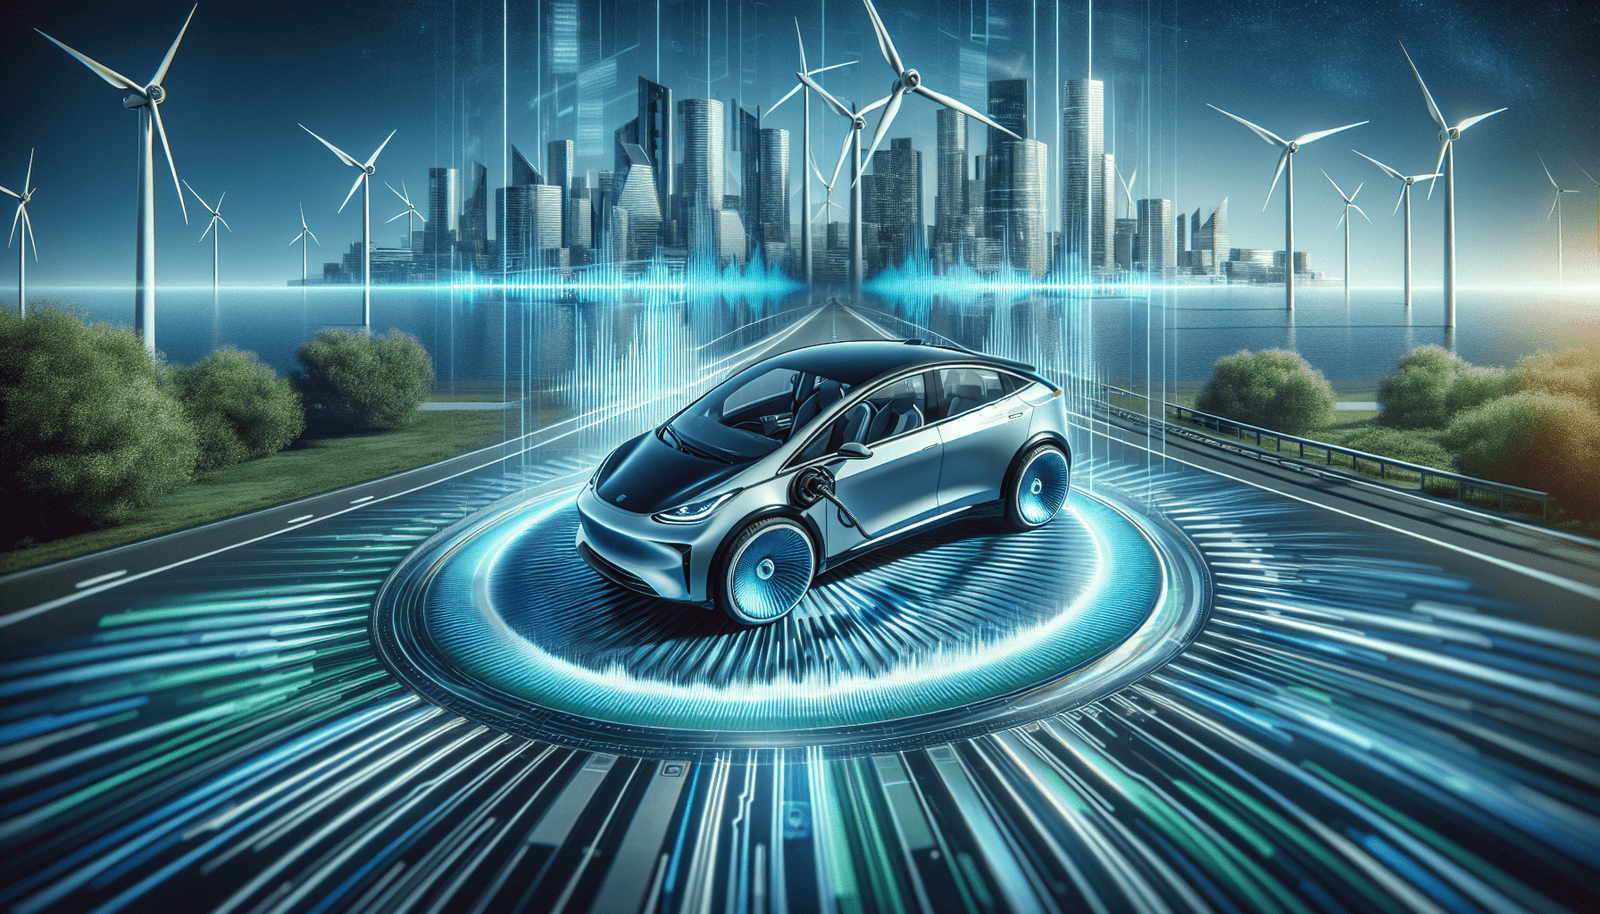 Are There Innovations In Electric Vehicle Sound And Noise Control?